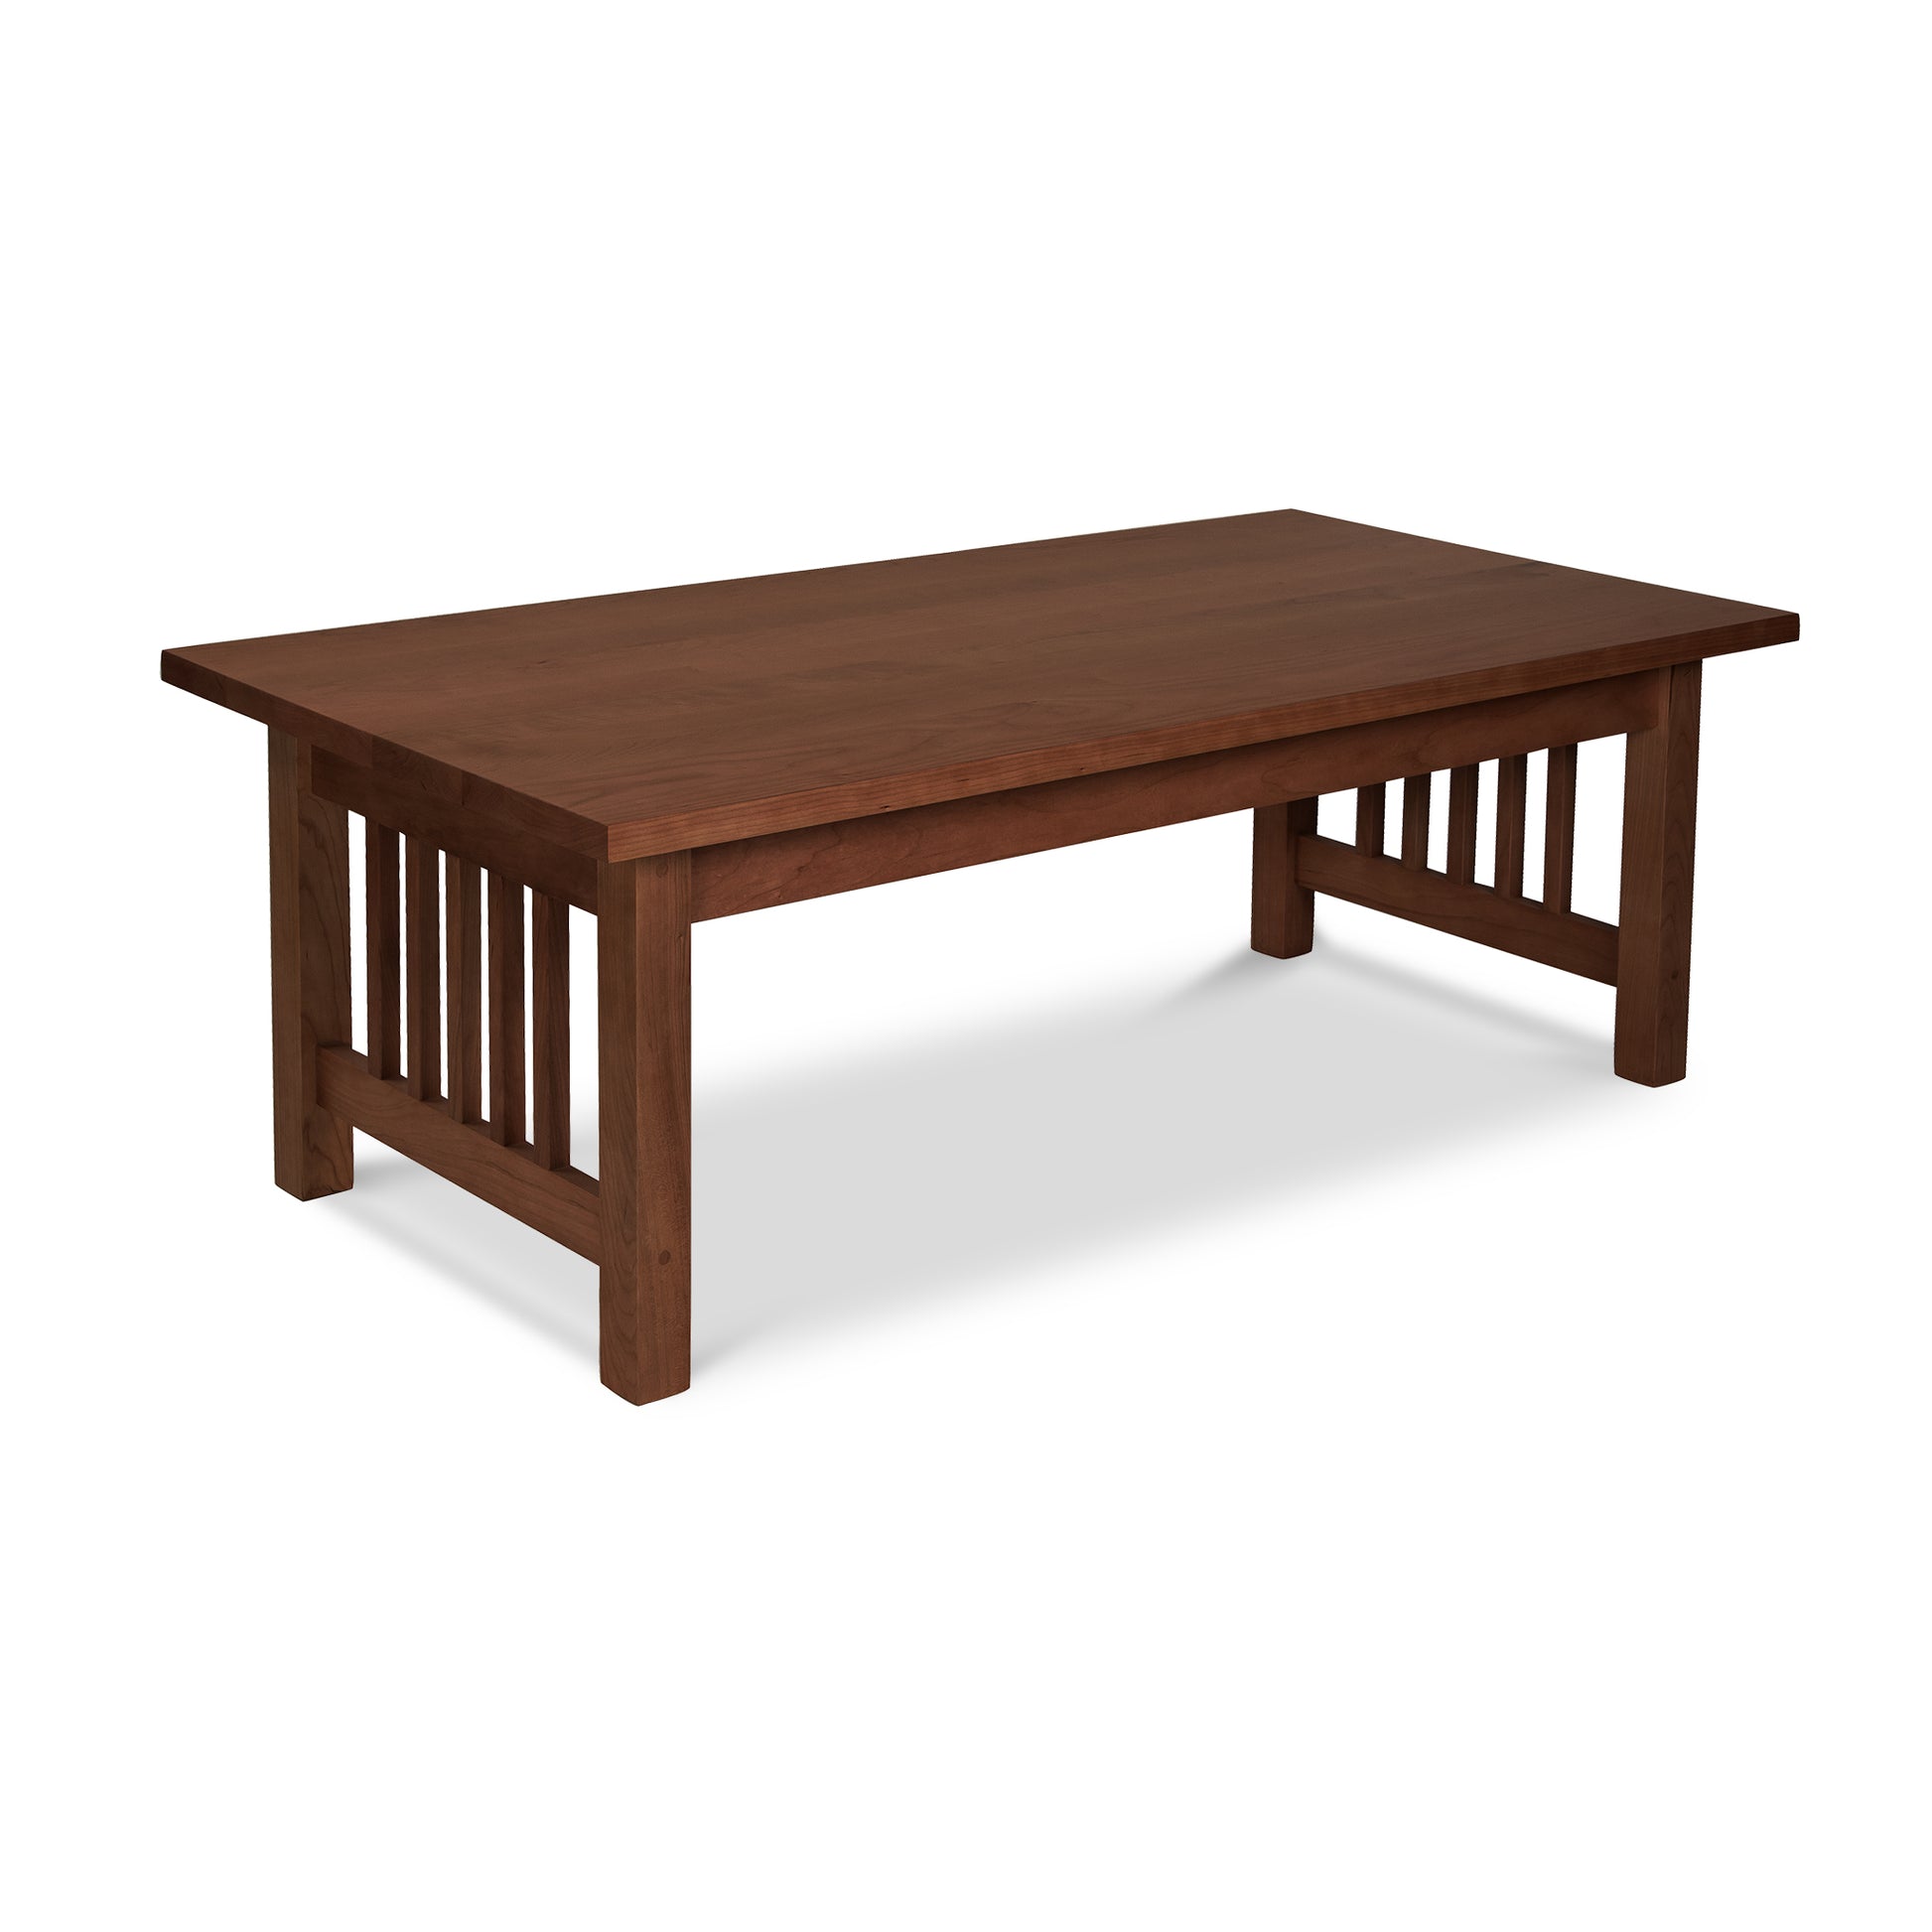 American Mission Coffee Table By Lyndon